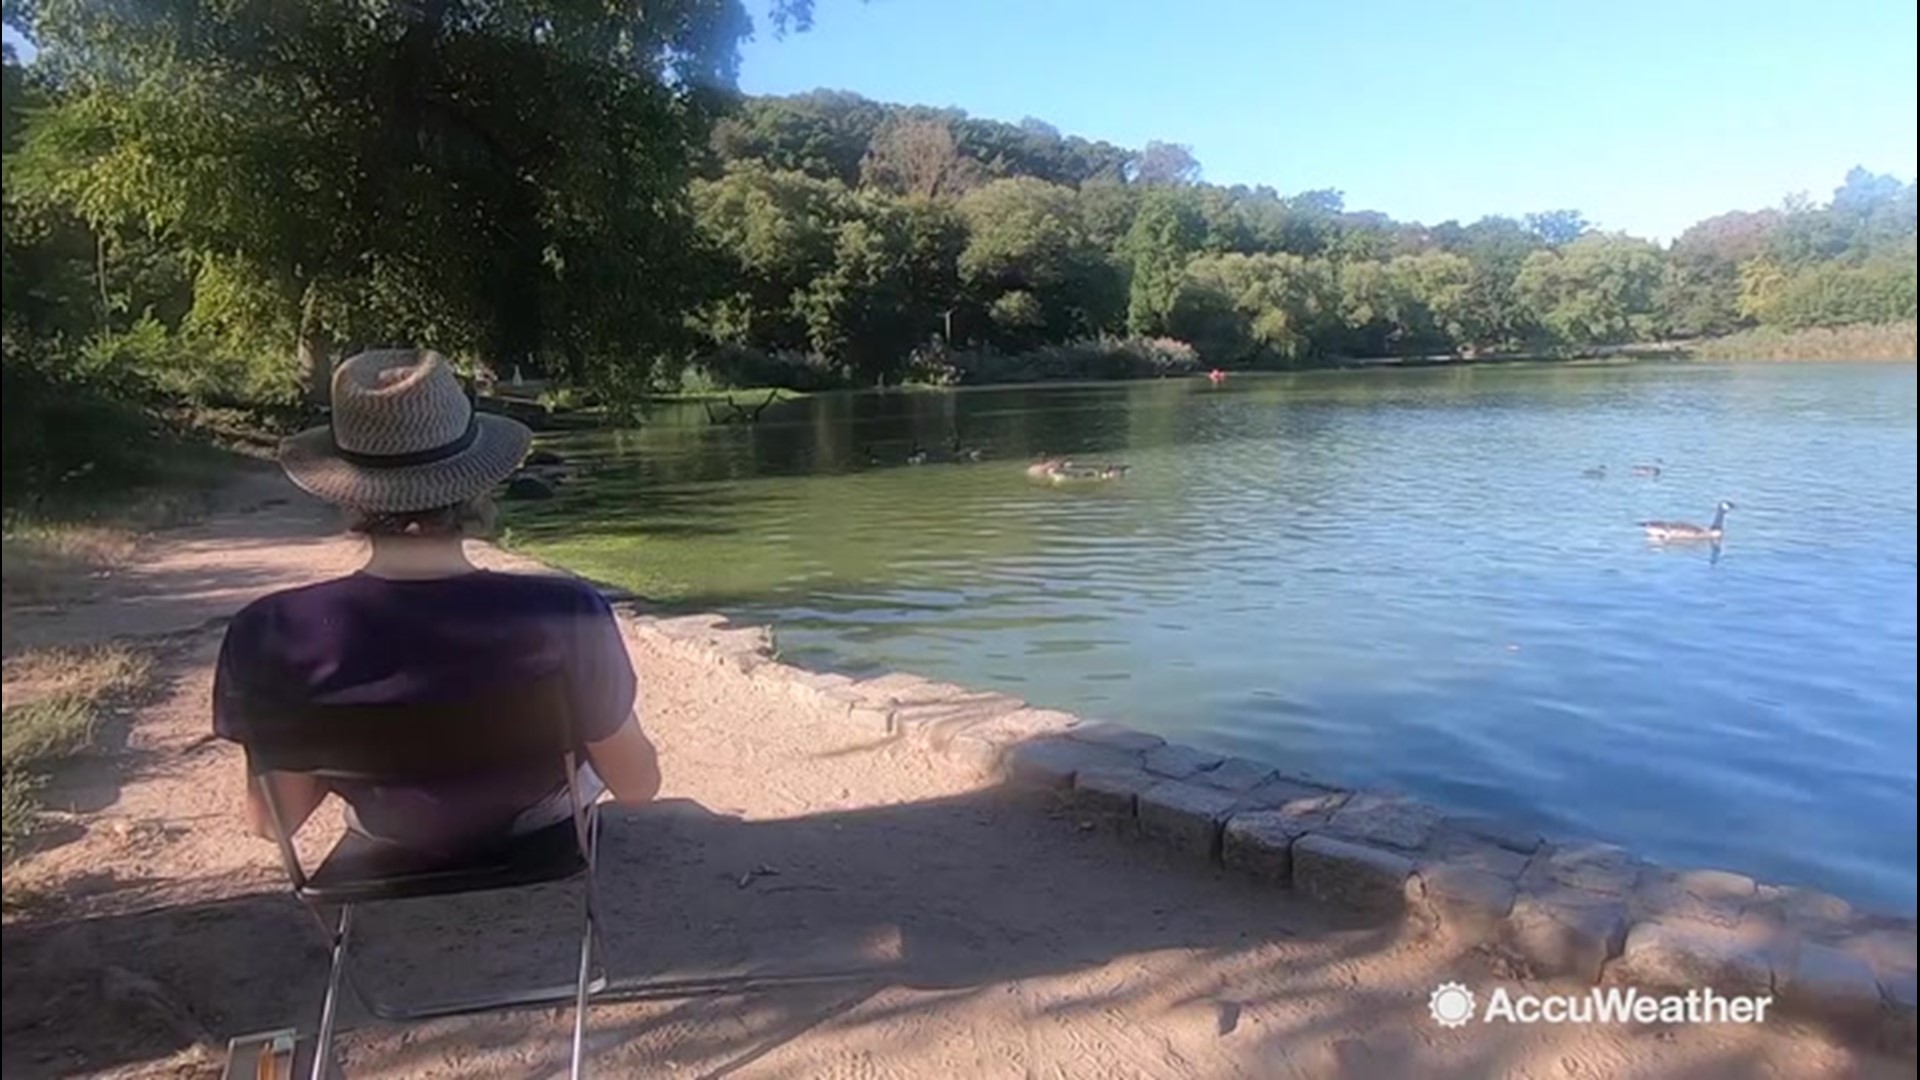 On the first day of autumn, New York City saw Accuweather RealFeel Temperatures as high as 92 degrees Fahrenheit. Accuweather's Dexter Henry visited a park to see how people were enjoying the warm start to the new season.